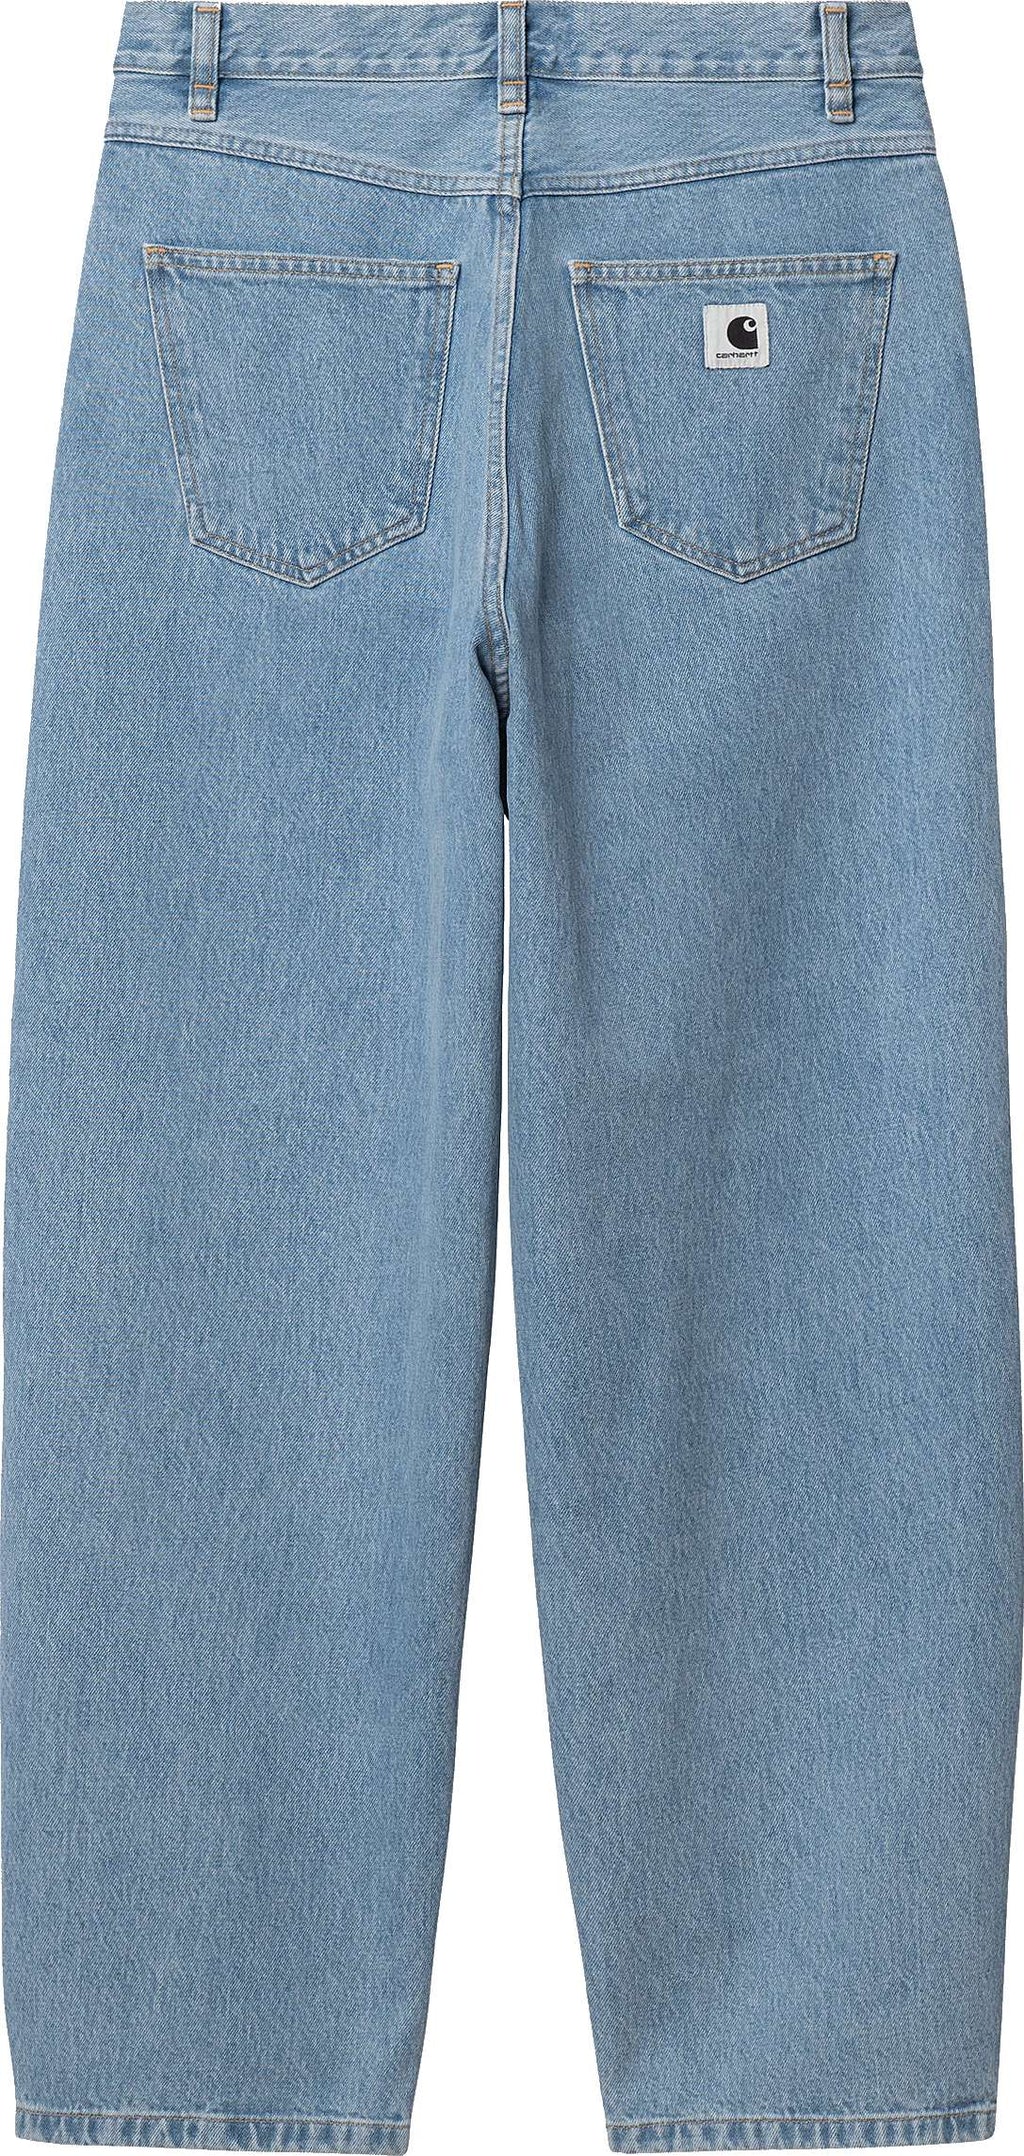  Carhartt Wip Jeans W Brandon Pant Blue Stone Bleached Donna - 2